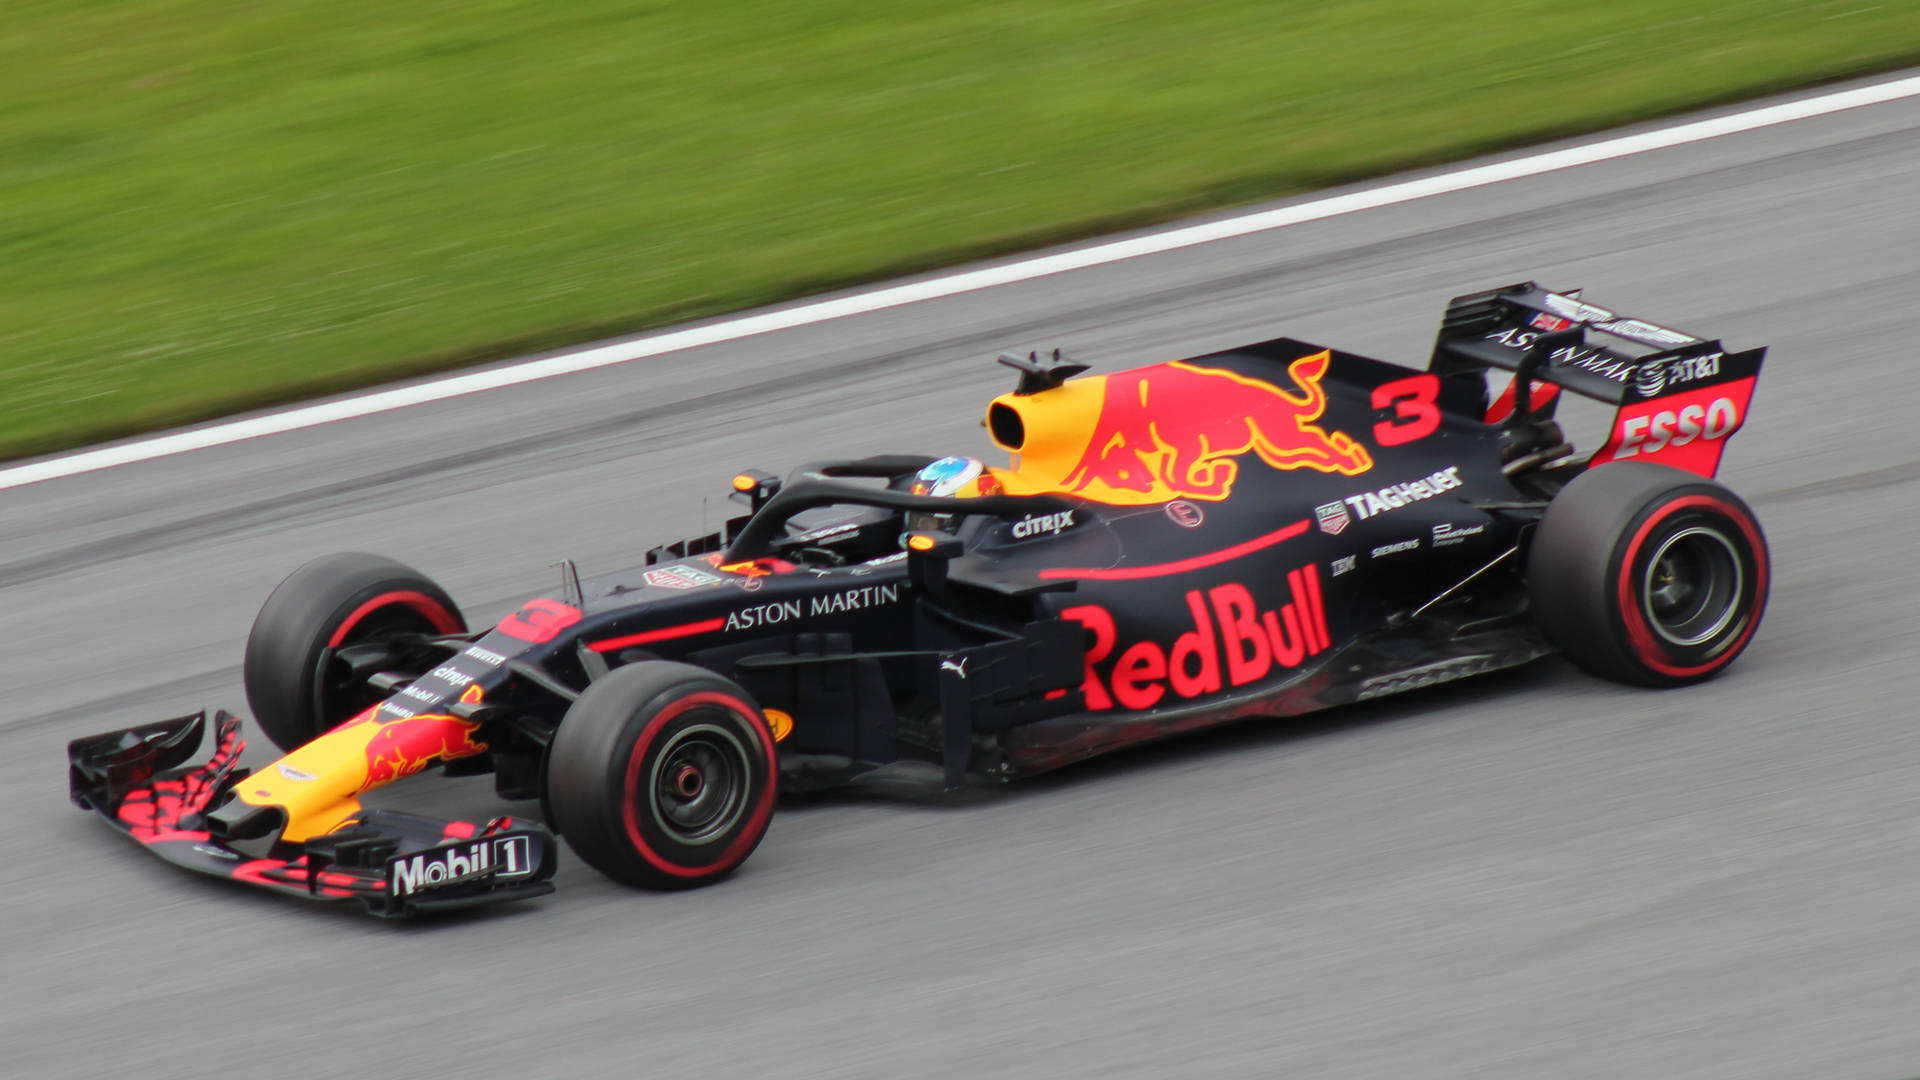 Night Thrill - Red Bull Racing Car in Action Wallpaper